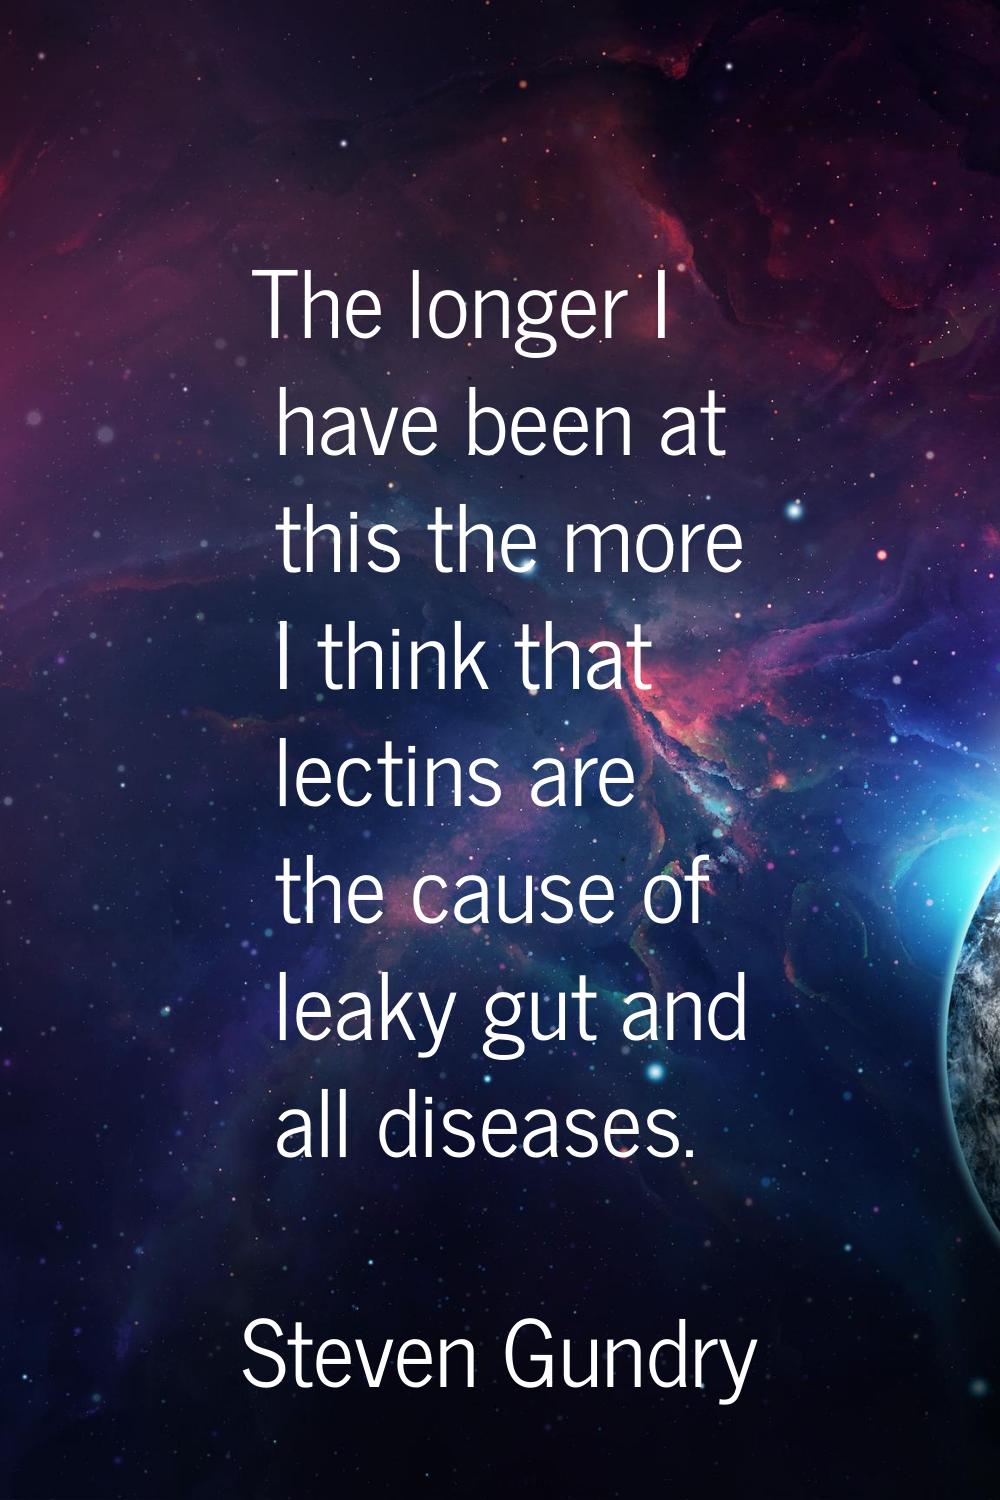 The longer I have been at this the more I think that lectins are the cause of leaky gut and all dis